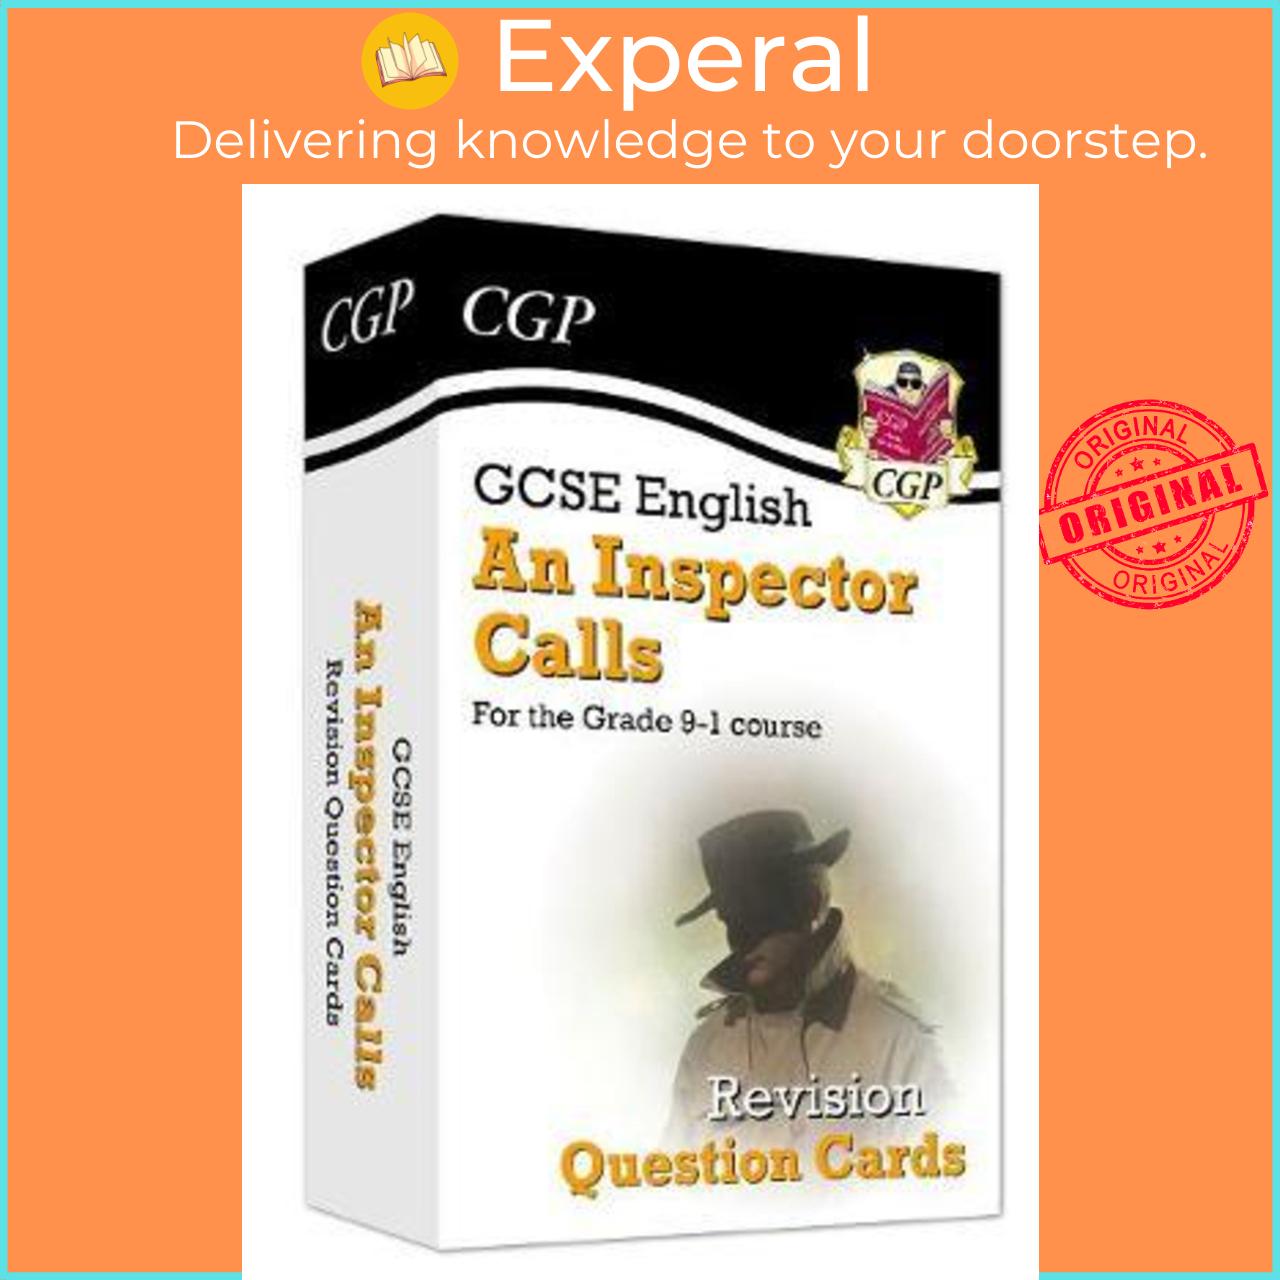 Sách - New Grade 9-1 GCSE English - An Inspector Calls Revision Question Cards by CGP Books (UK edition, paperback)